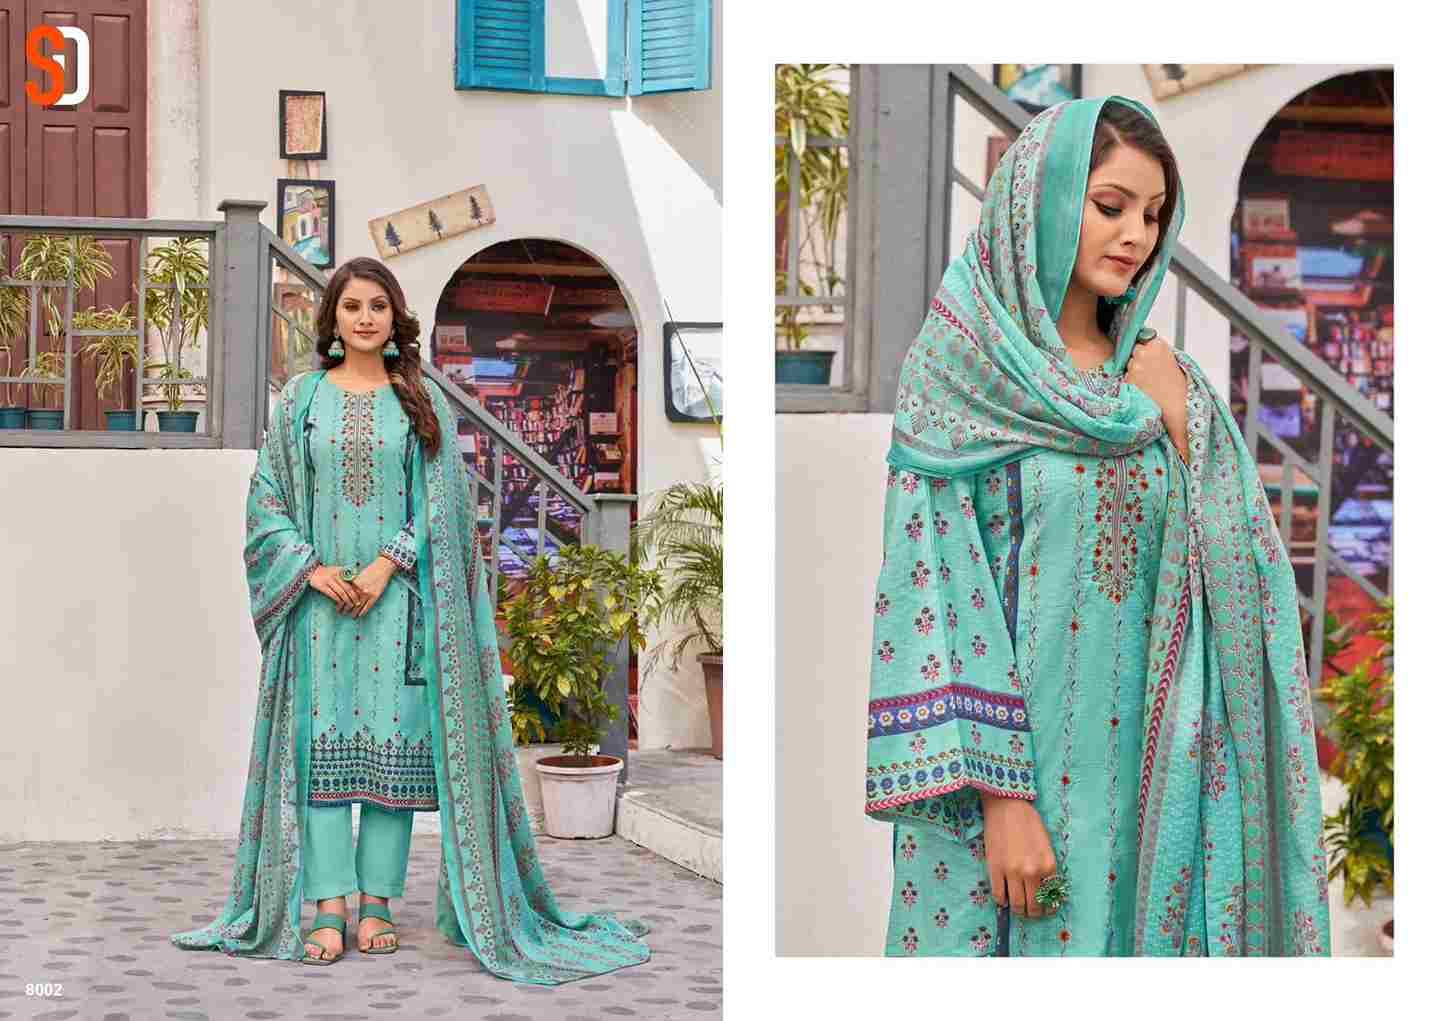 Bin Saeed Lawn Collection Vol-8 By Shraddha Designer 8001 To 8006 Series Designer Pakistani Suits Beautiful Fancy Stylish Colorful Party Wear & Occasional Wear Pure Cotton Print With Embroidery Dresses At Wholesale Price